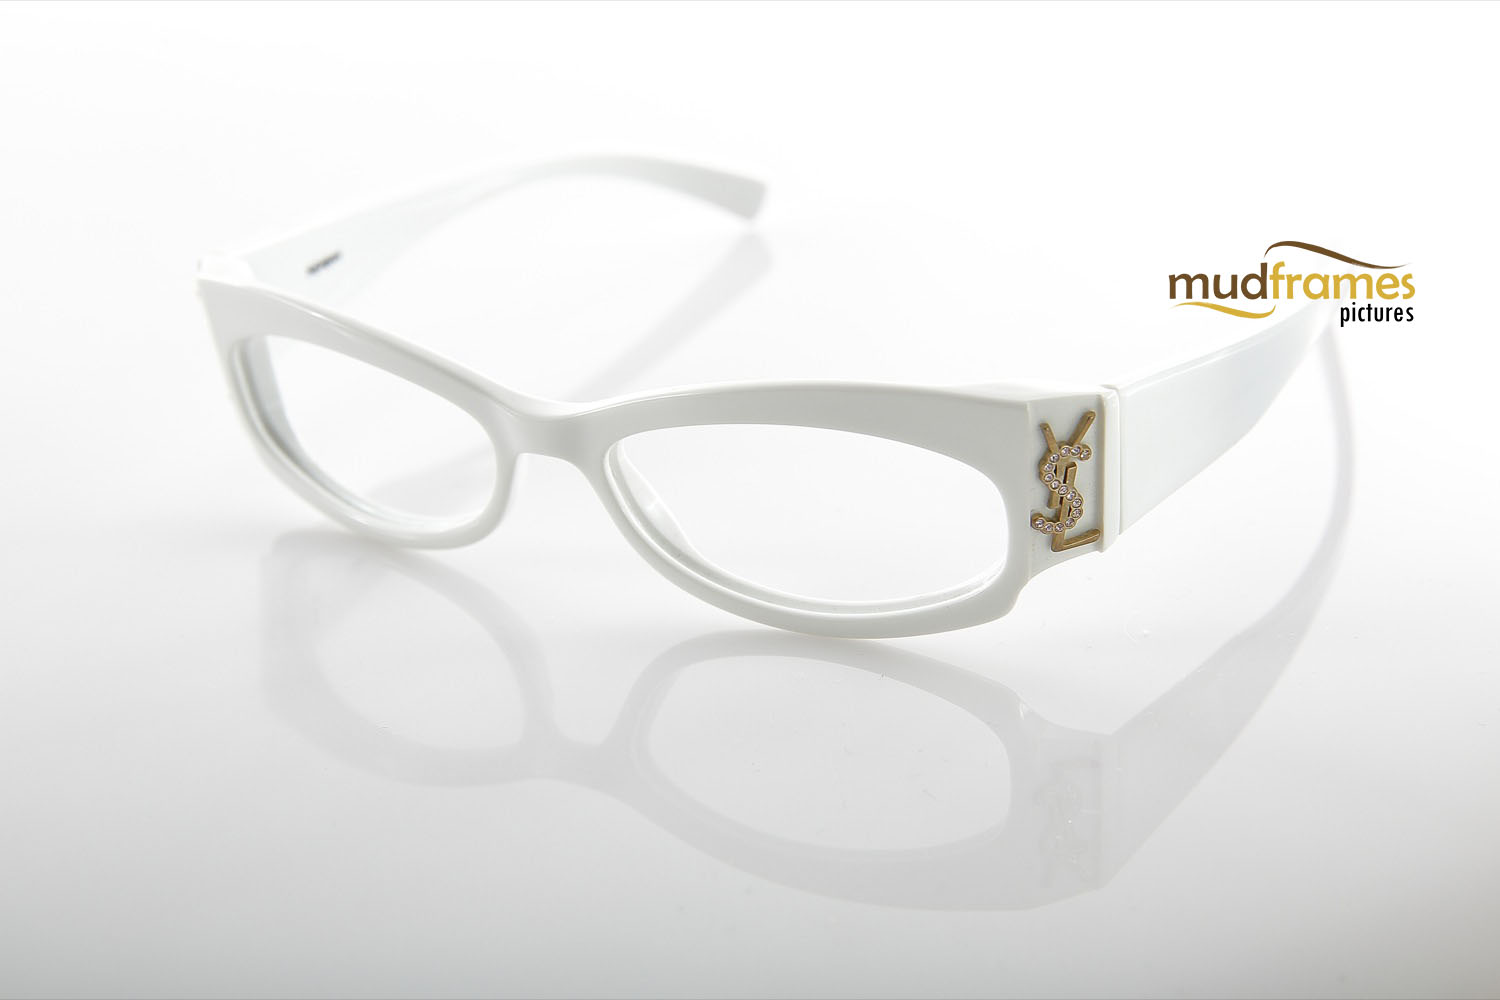 Spectacles Product Photography